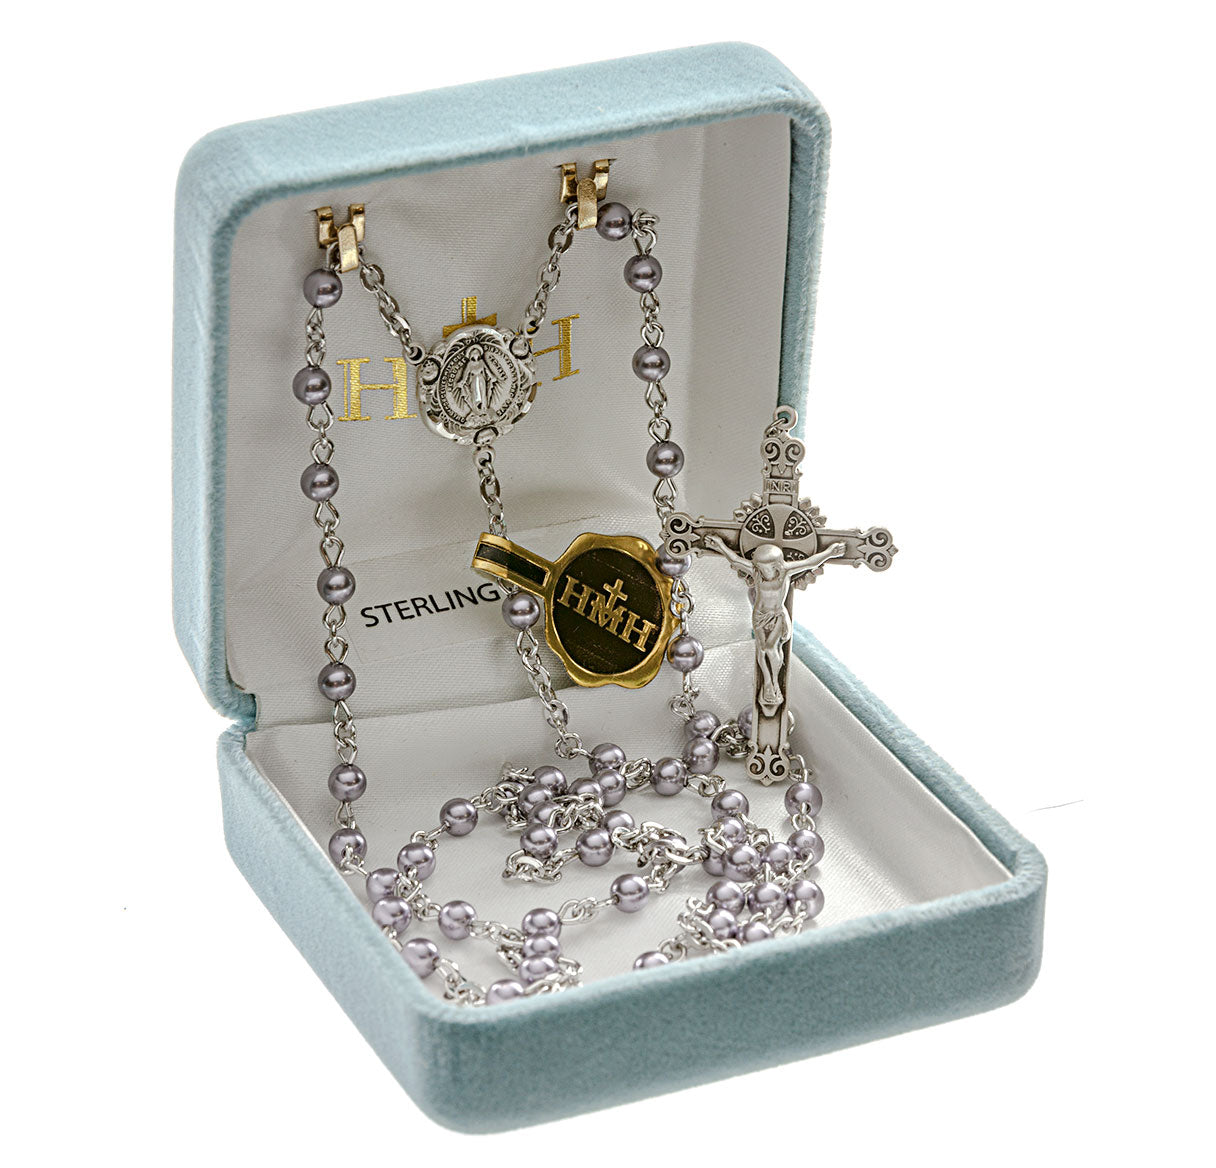 Rosary Sterling Crucifix and Centerpiece Created with Swarovski Crystal 4mm Pearl Beads in Lavender by HMH